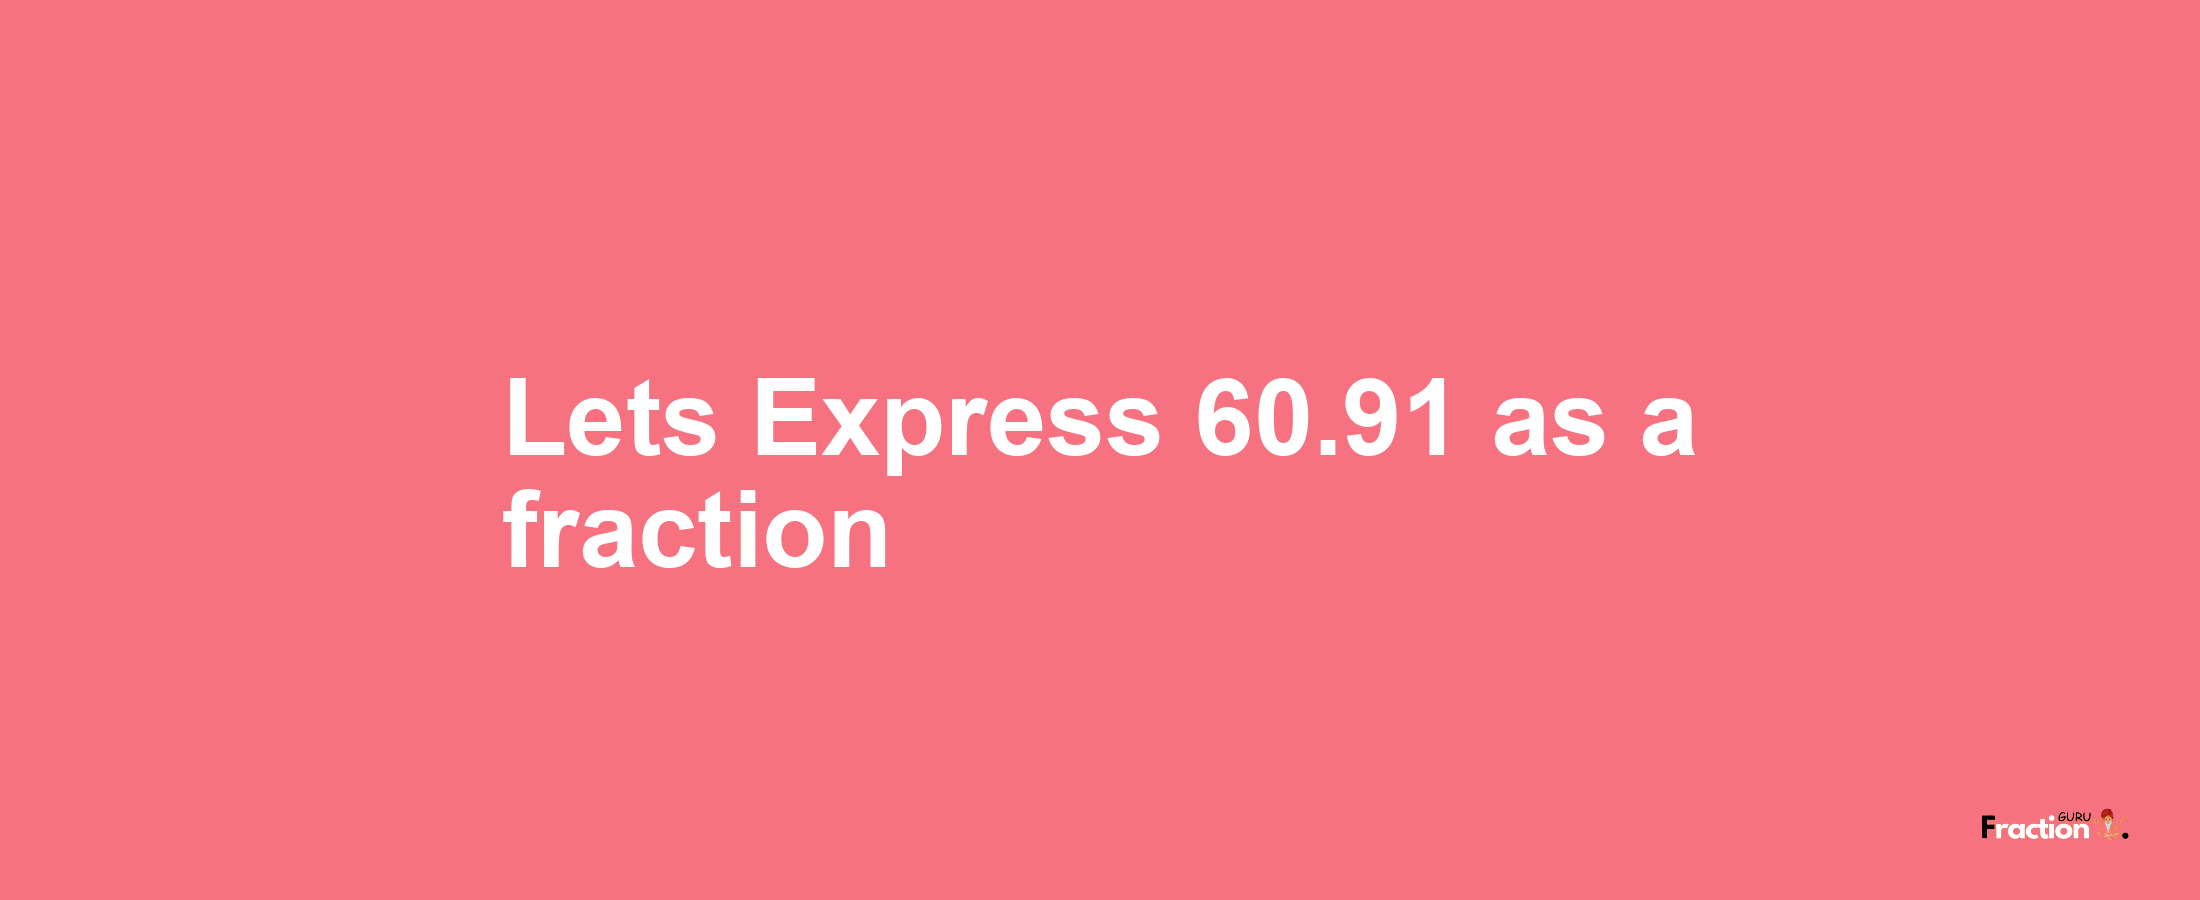 Lets Express 60.91 as afraction